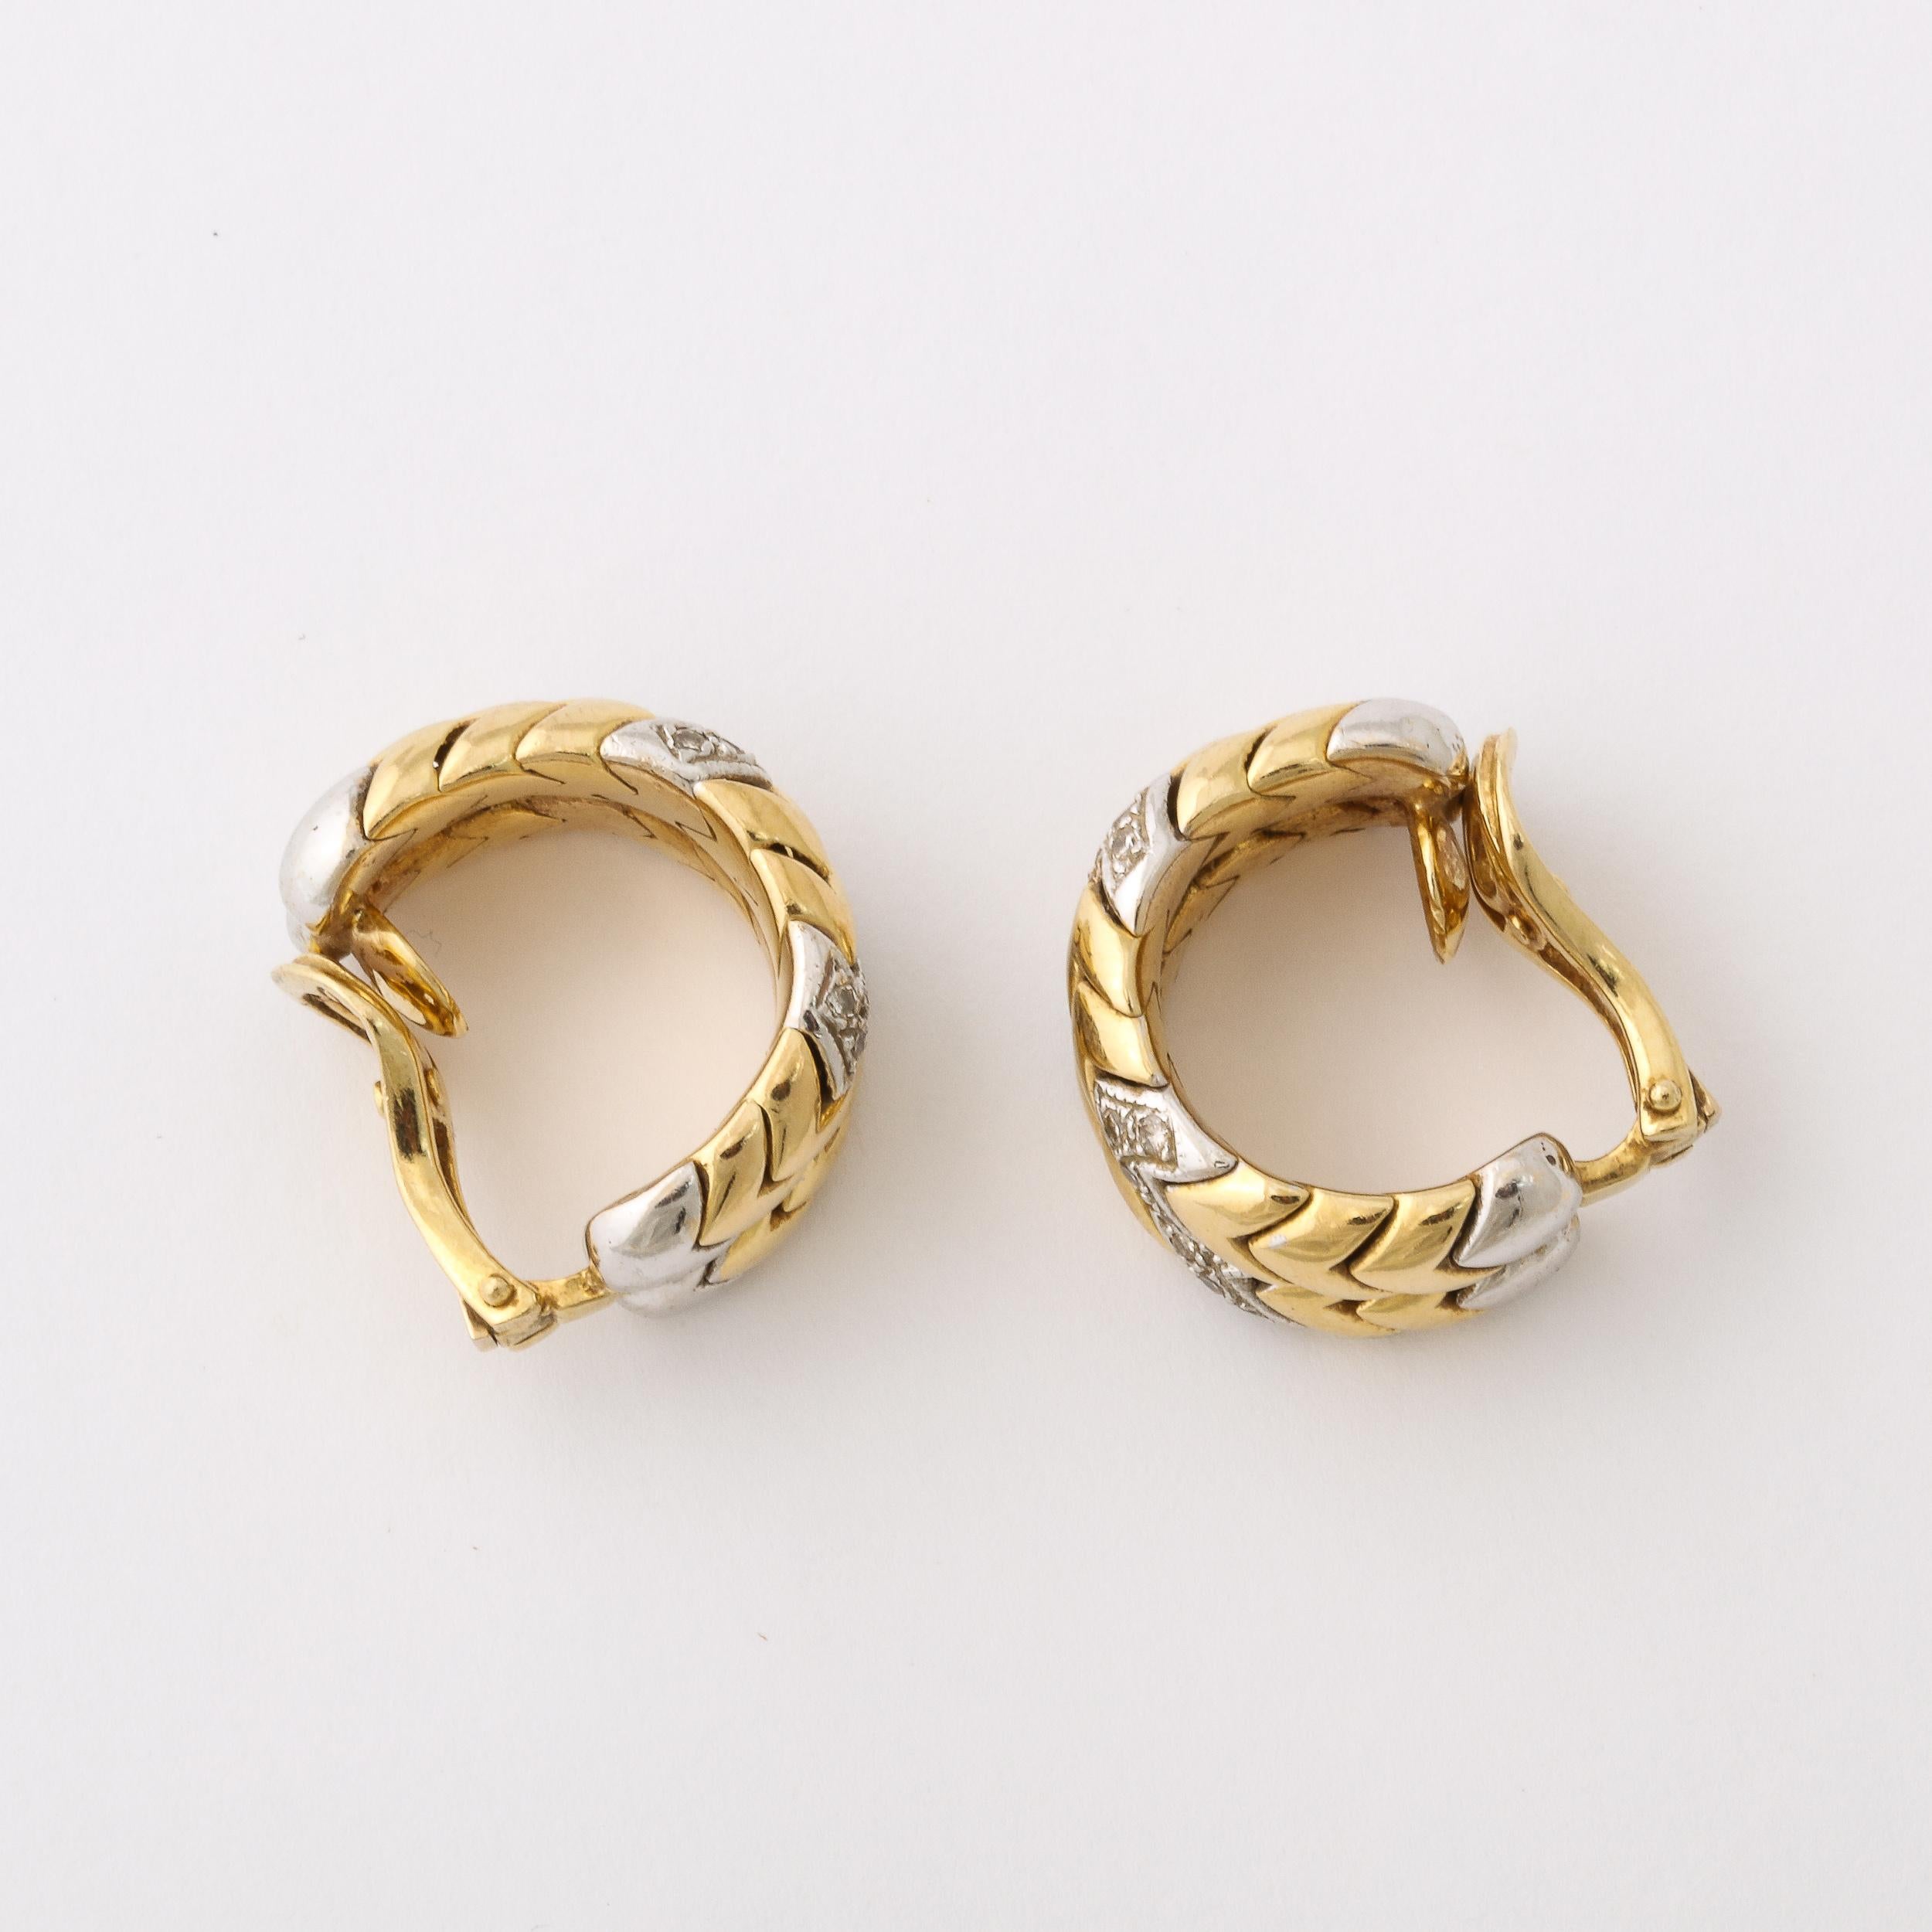 Pair of Midcentury 14 Carat Yellow and White Gold Earrings Inset with Diamonds For Sale 1